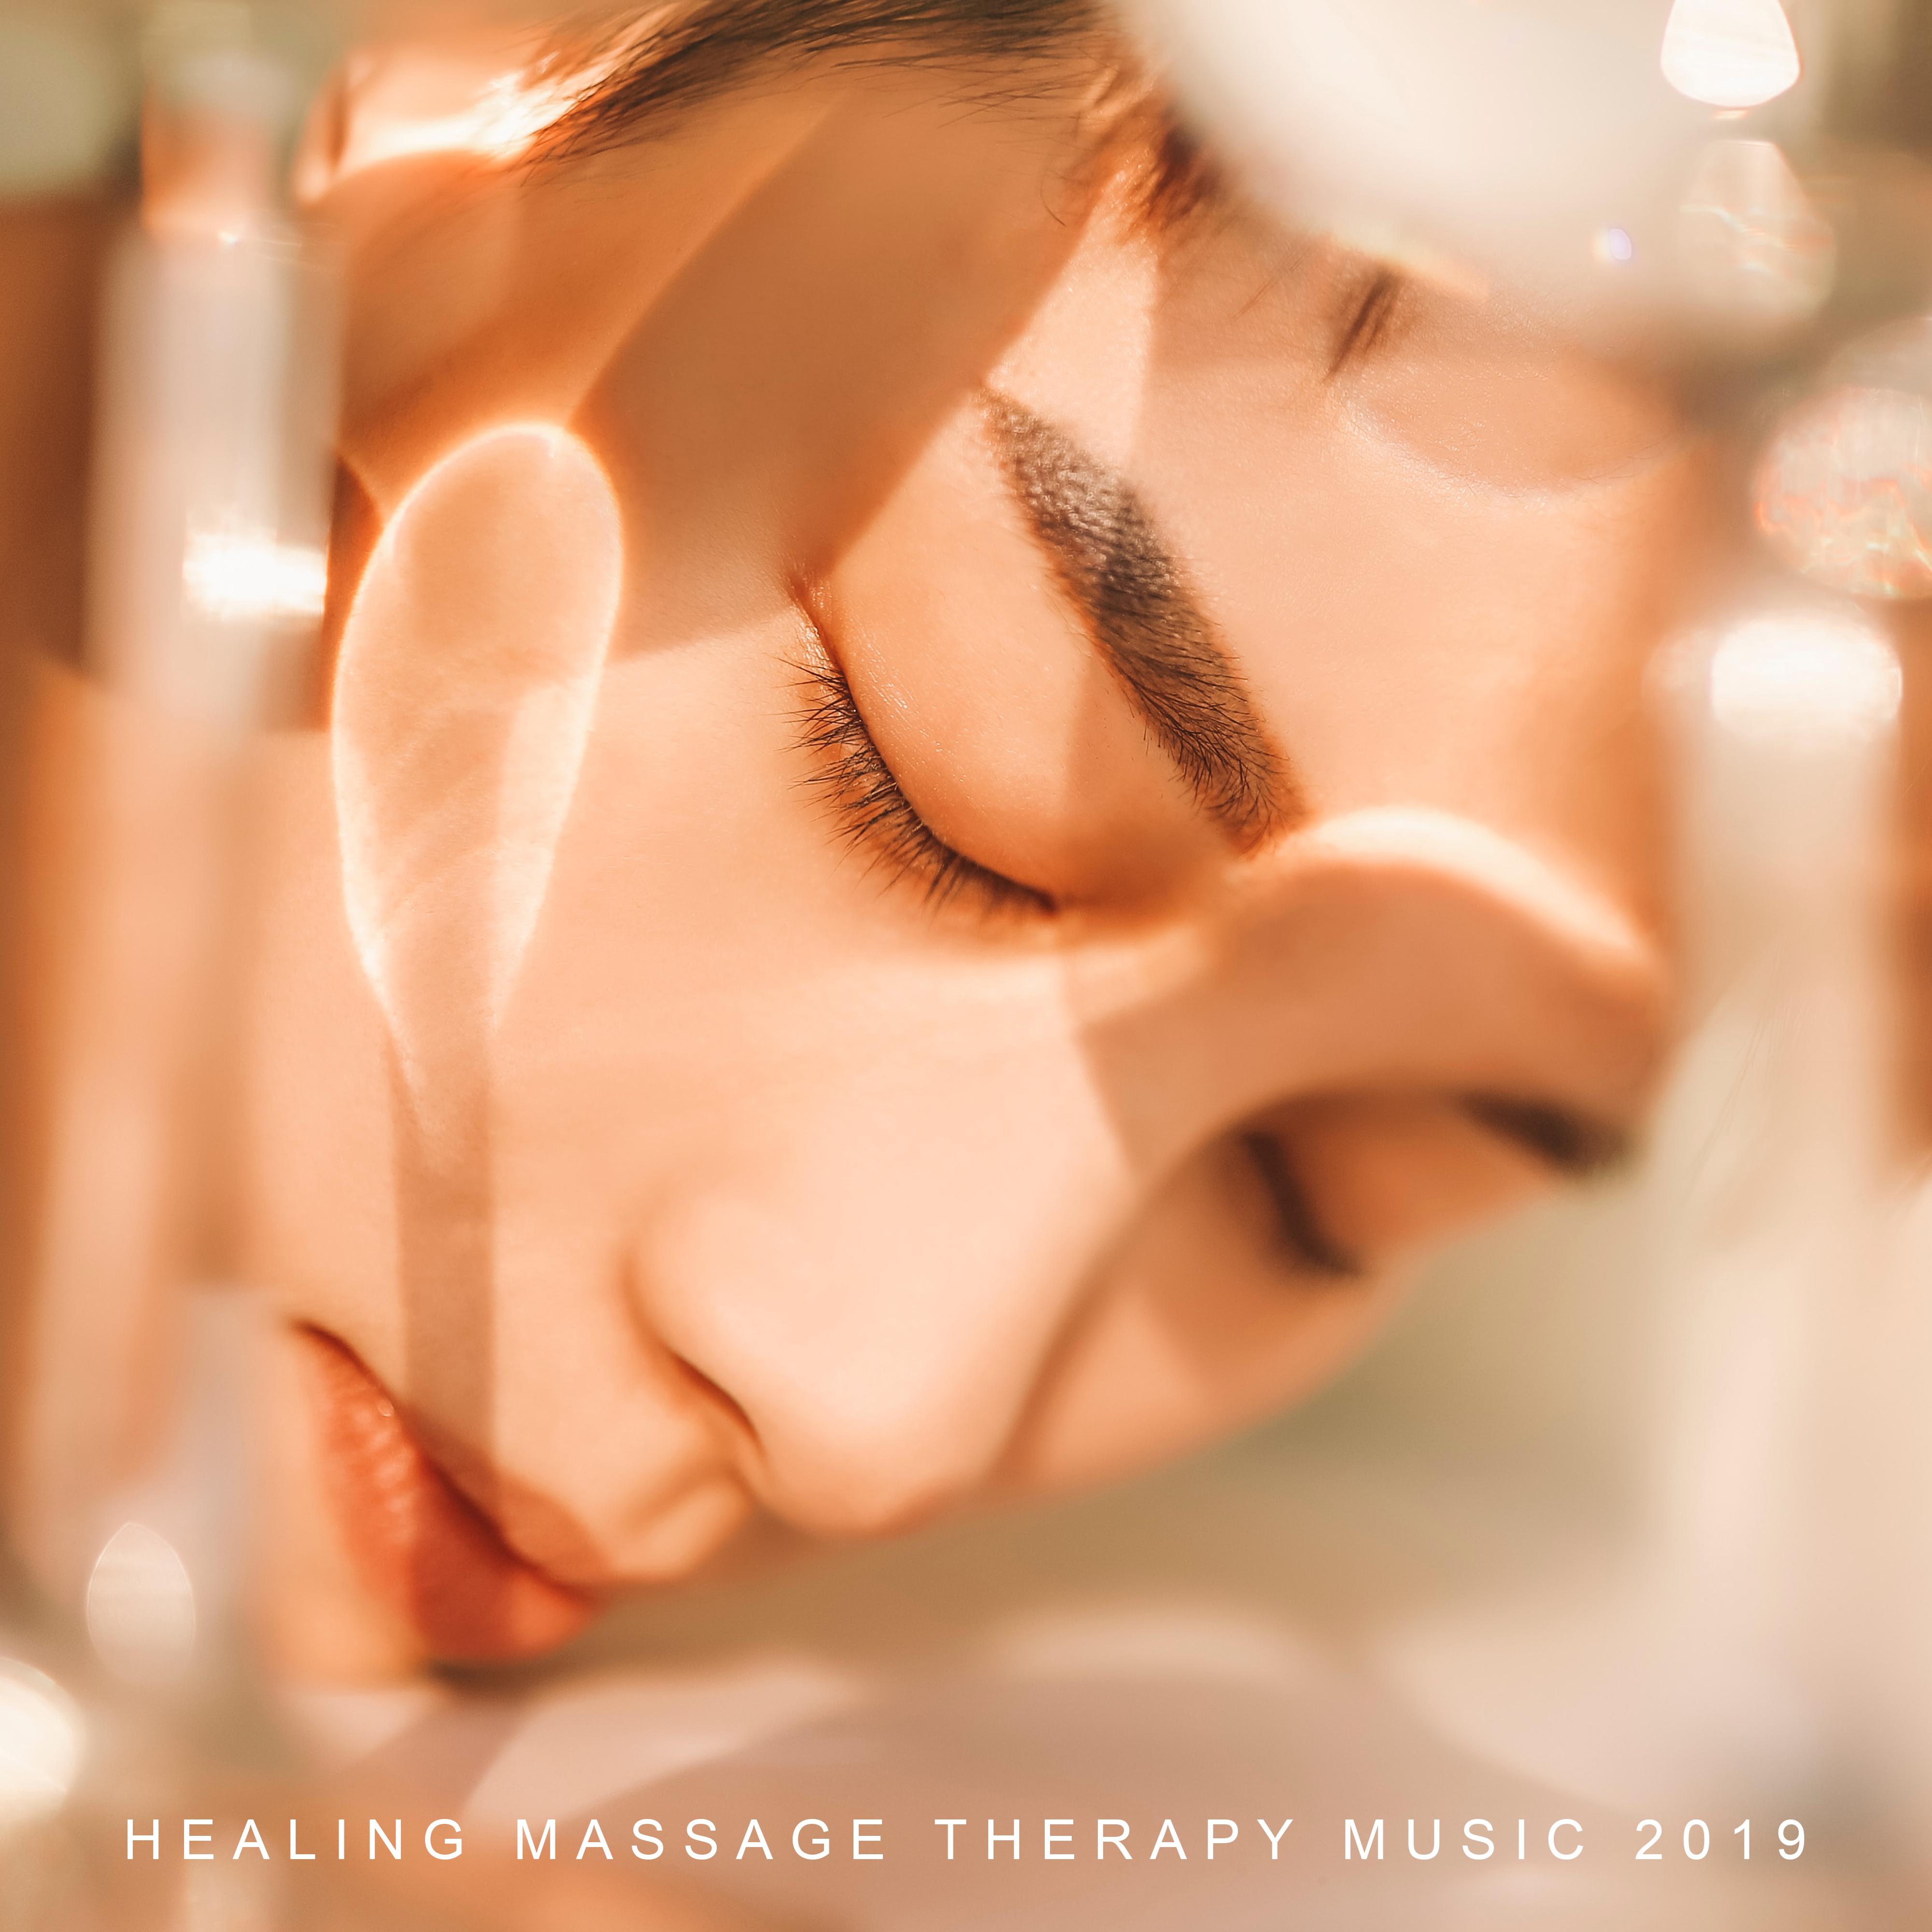 Healing Massage Therapy Music 2019 – New Age Music Mix Created for Spa & Wellness, Perfect Background Songs for Massage & Relaxation